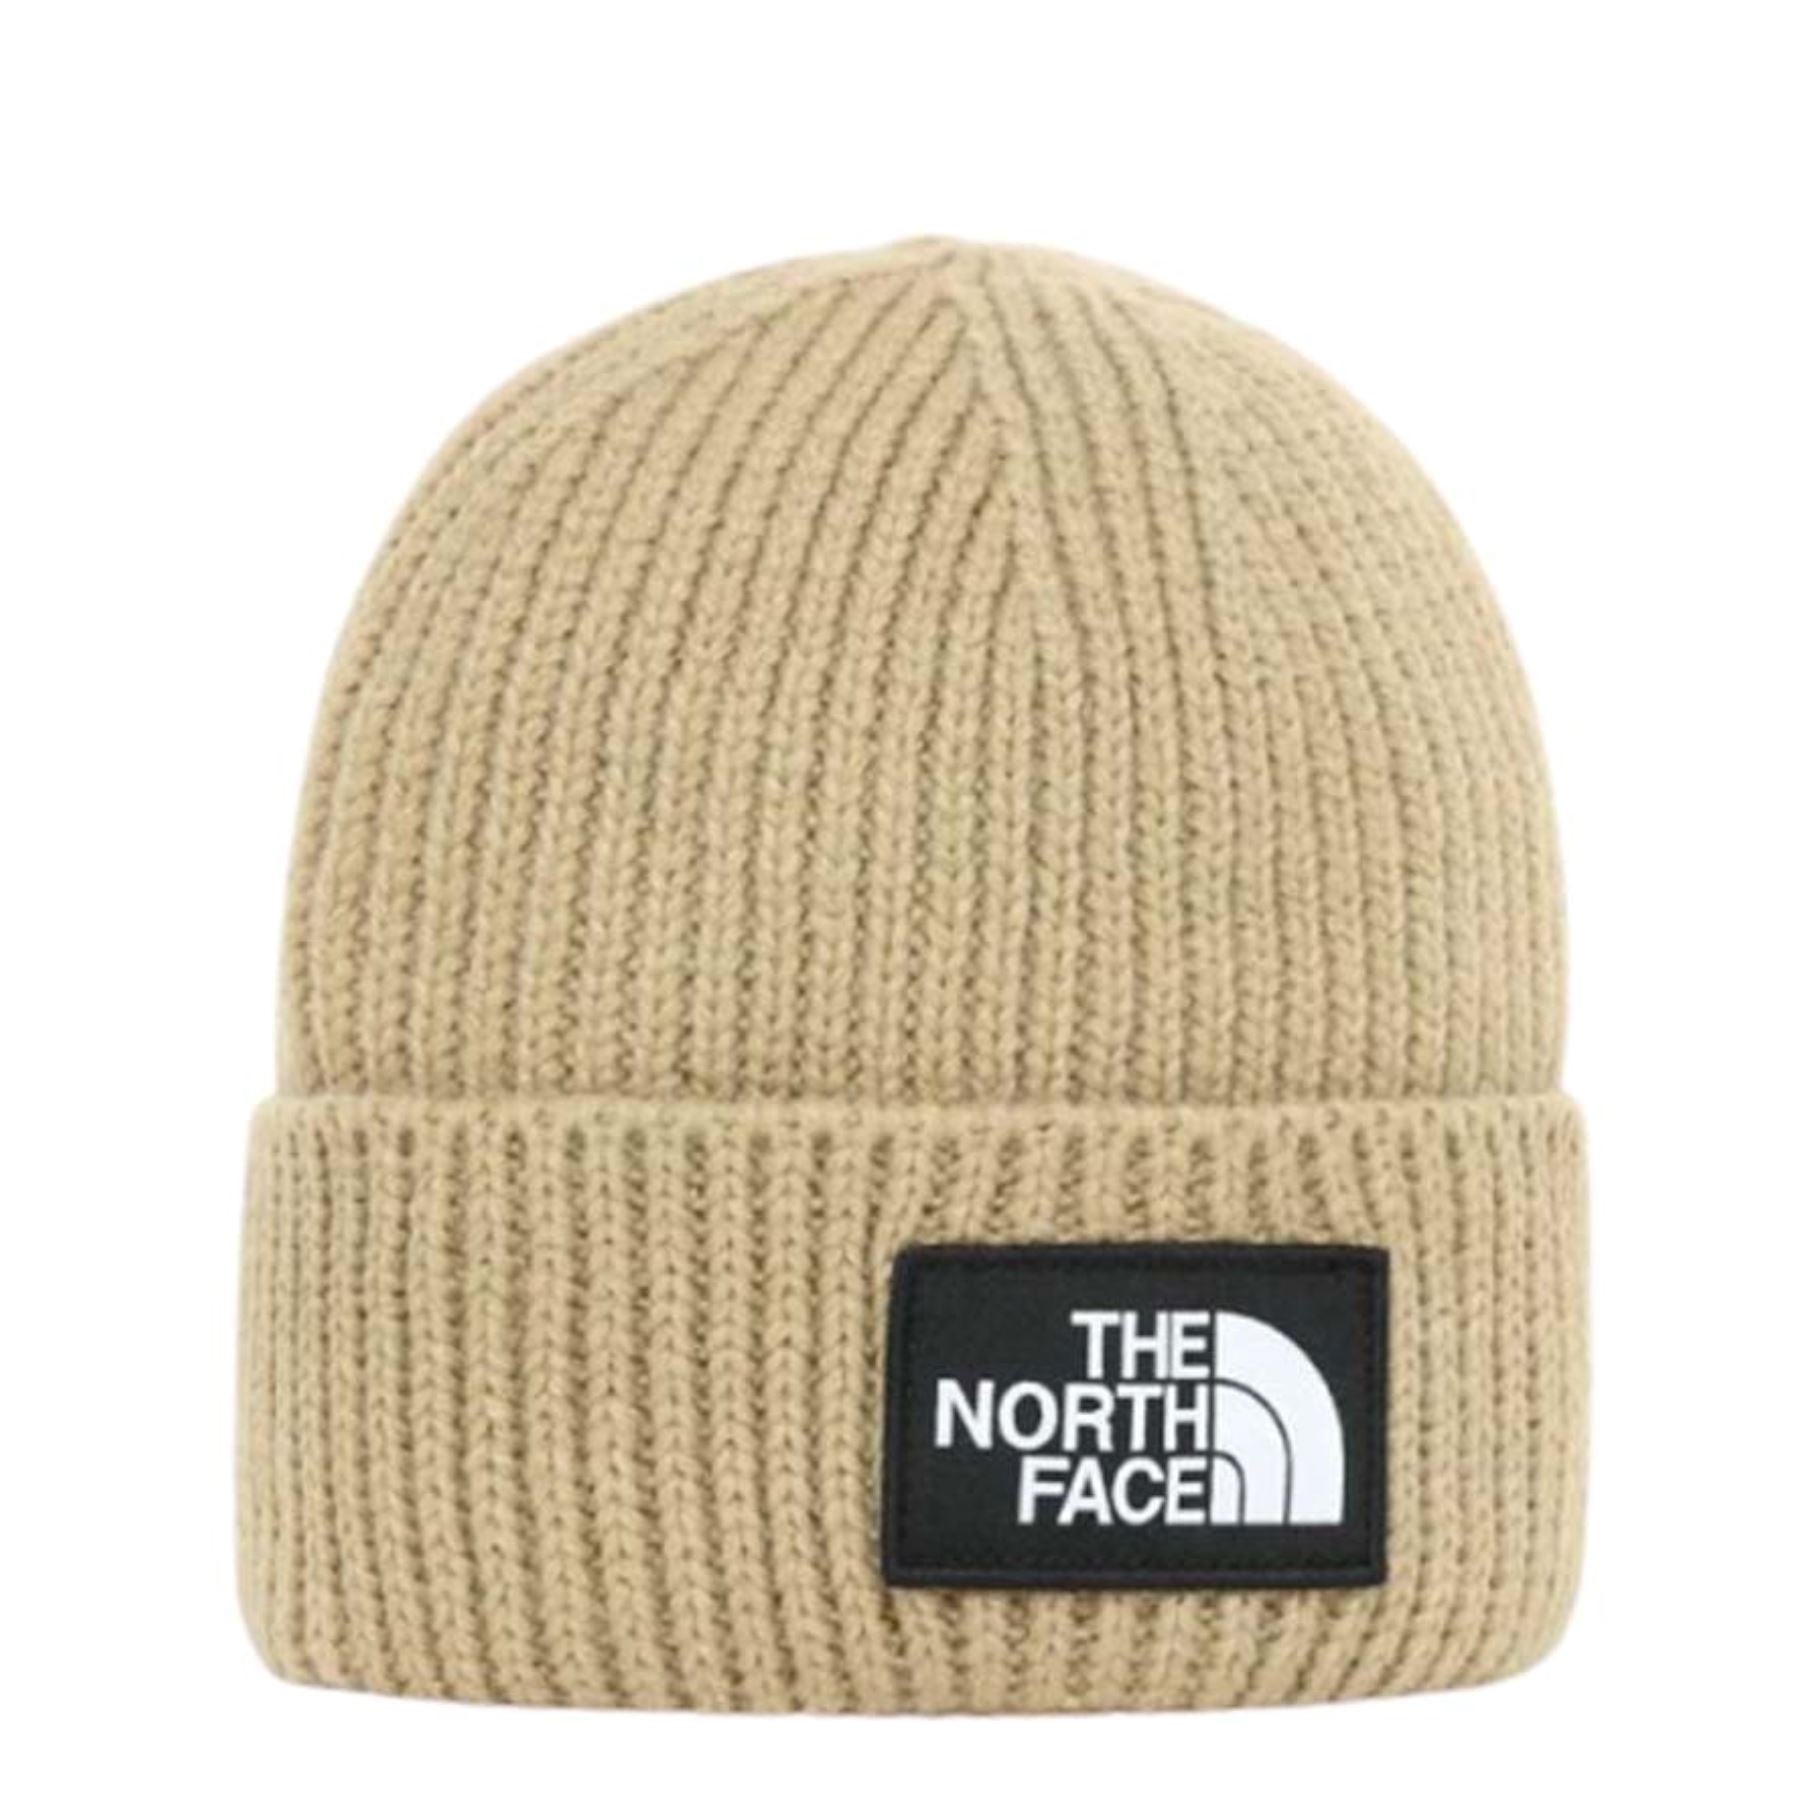 The North Face Logo Box Cuff Beanie (Small) - Almond Butter Beanies The North Face 